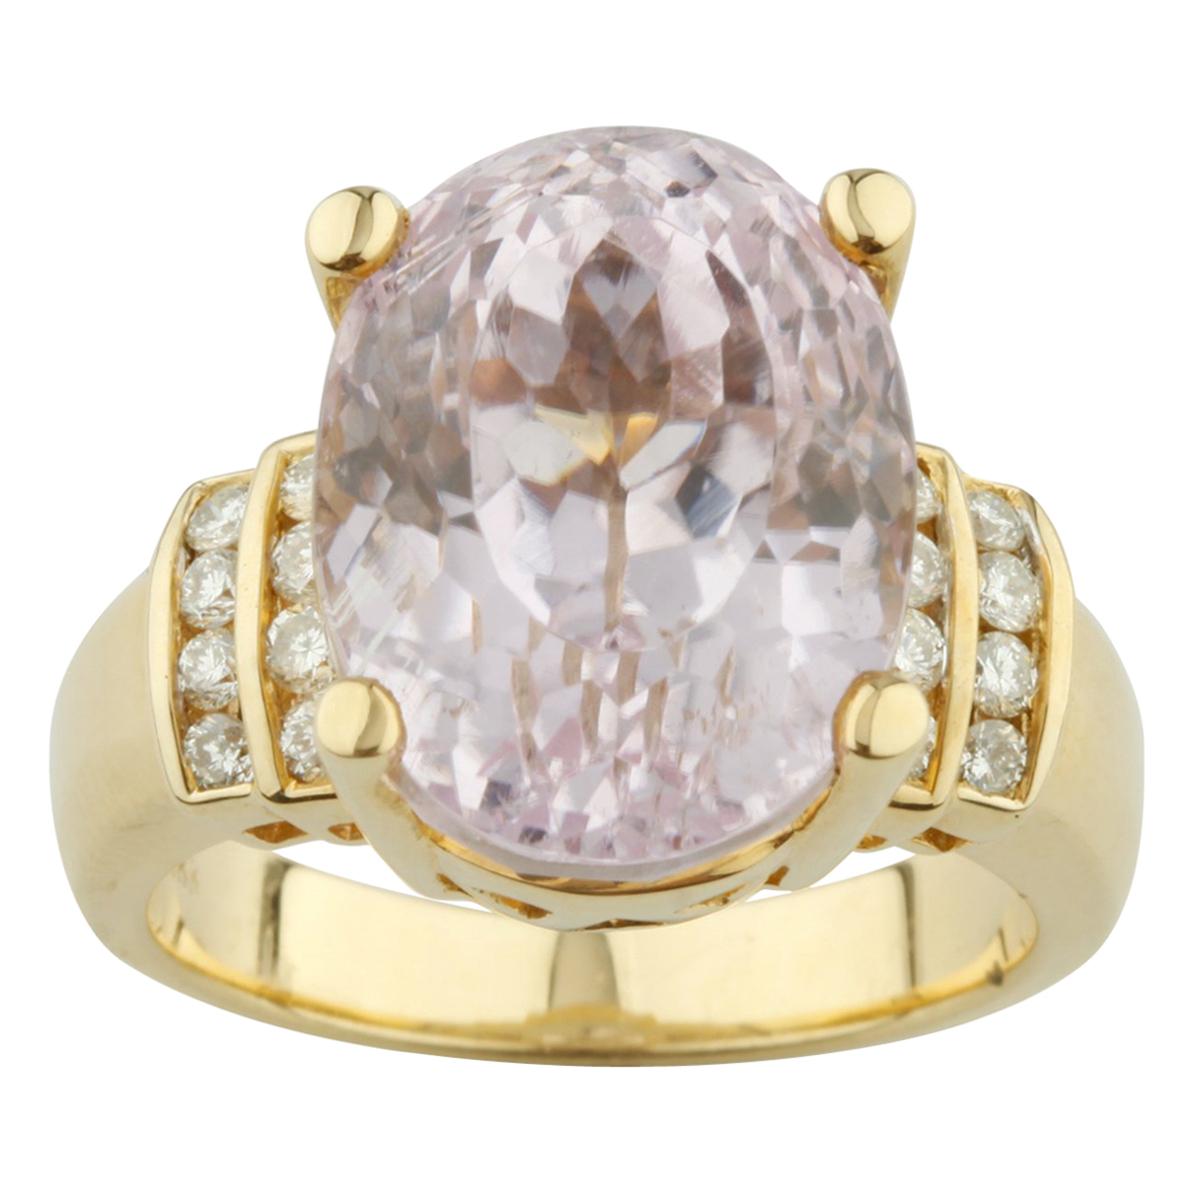 Kunzite Solitaire with Diamond Accents 18 Karat Yellow Gold Ring